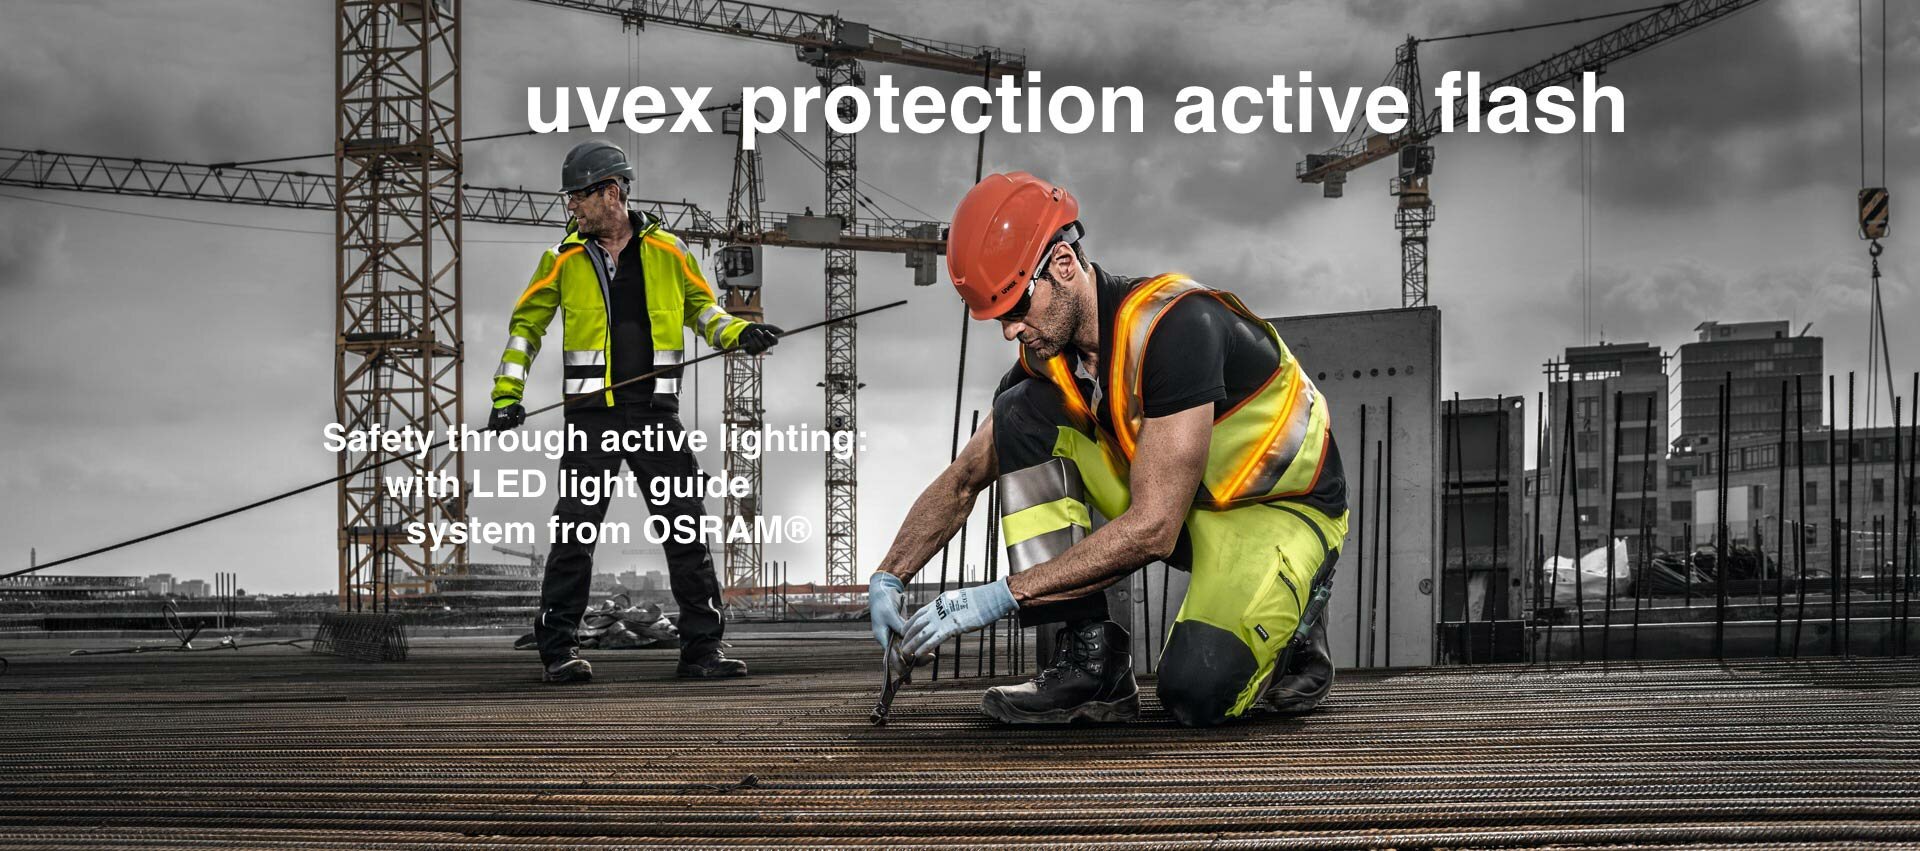 Be visible, be safe – with an active LED lighting vest from uvex